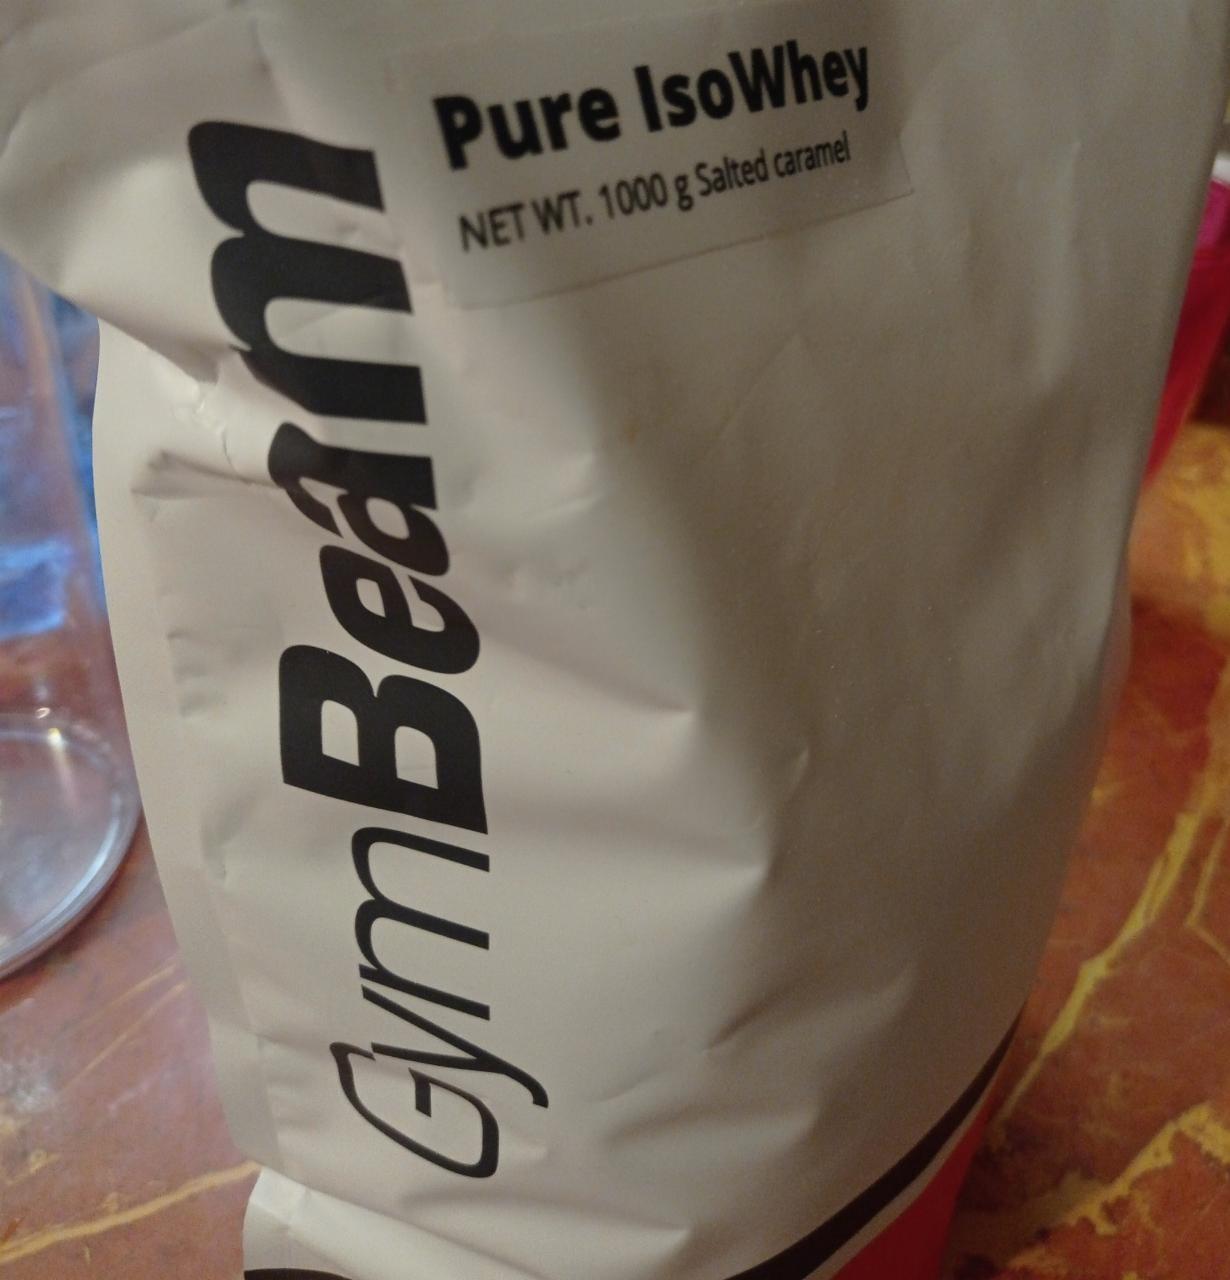 Fotografie - Pure IsoWhey Protein salted caramel GymBeam